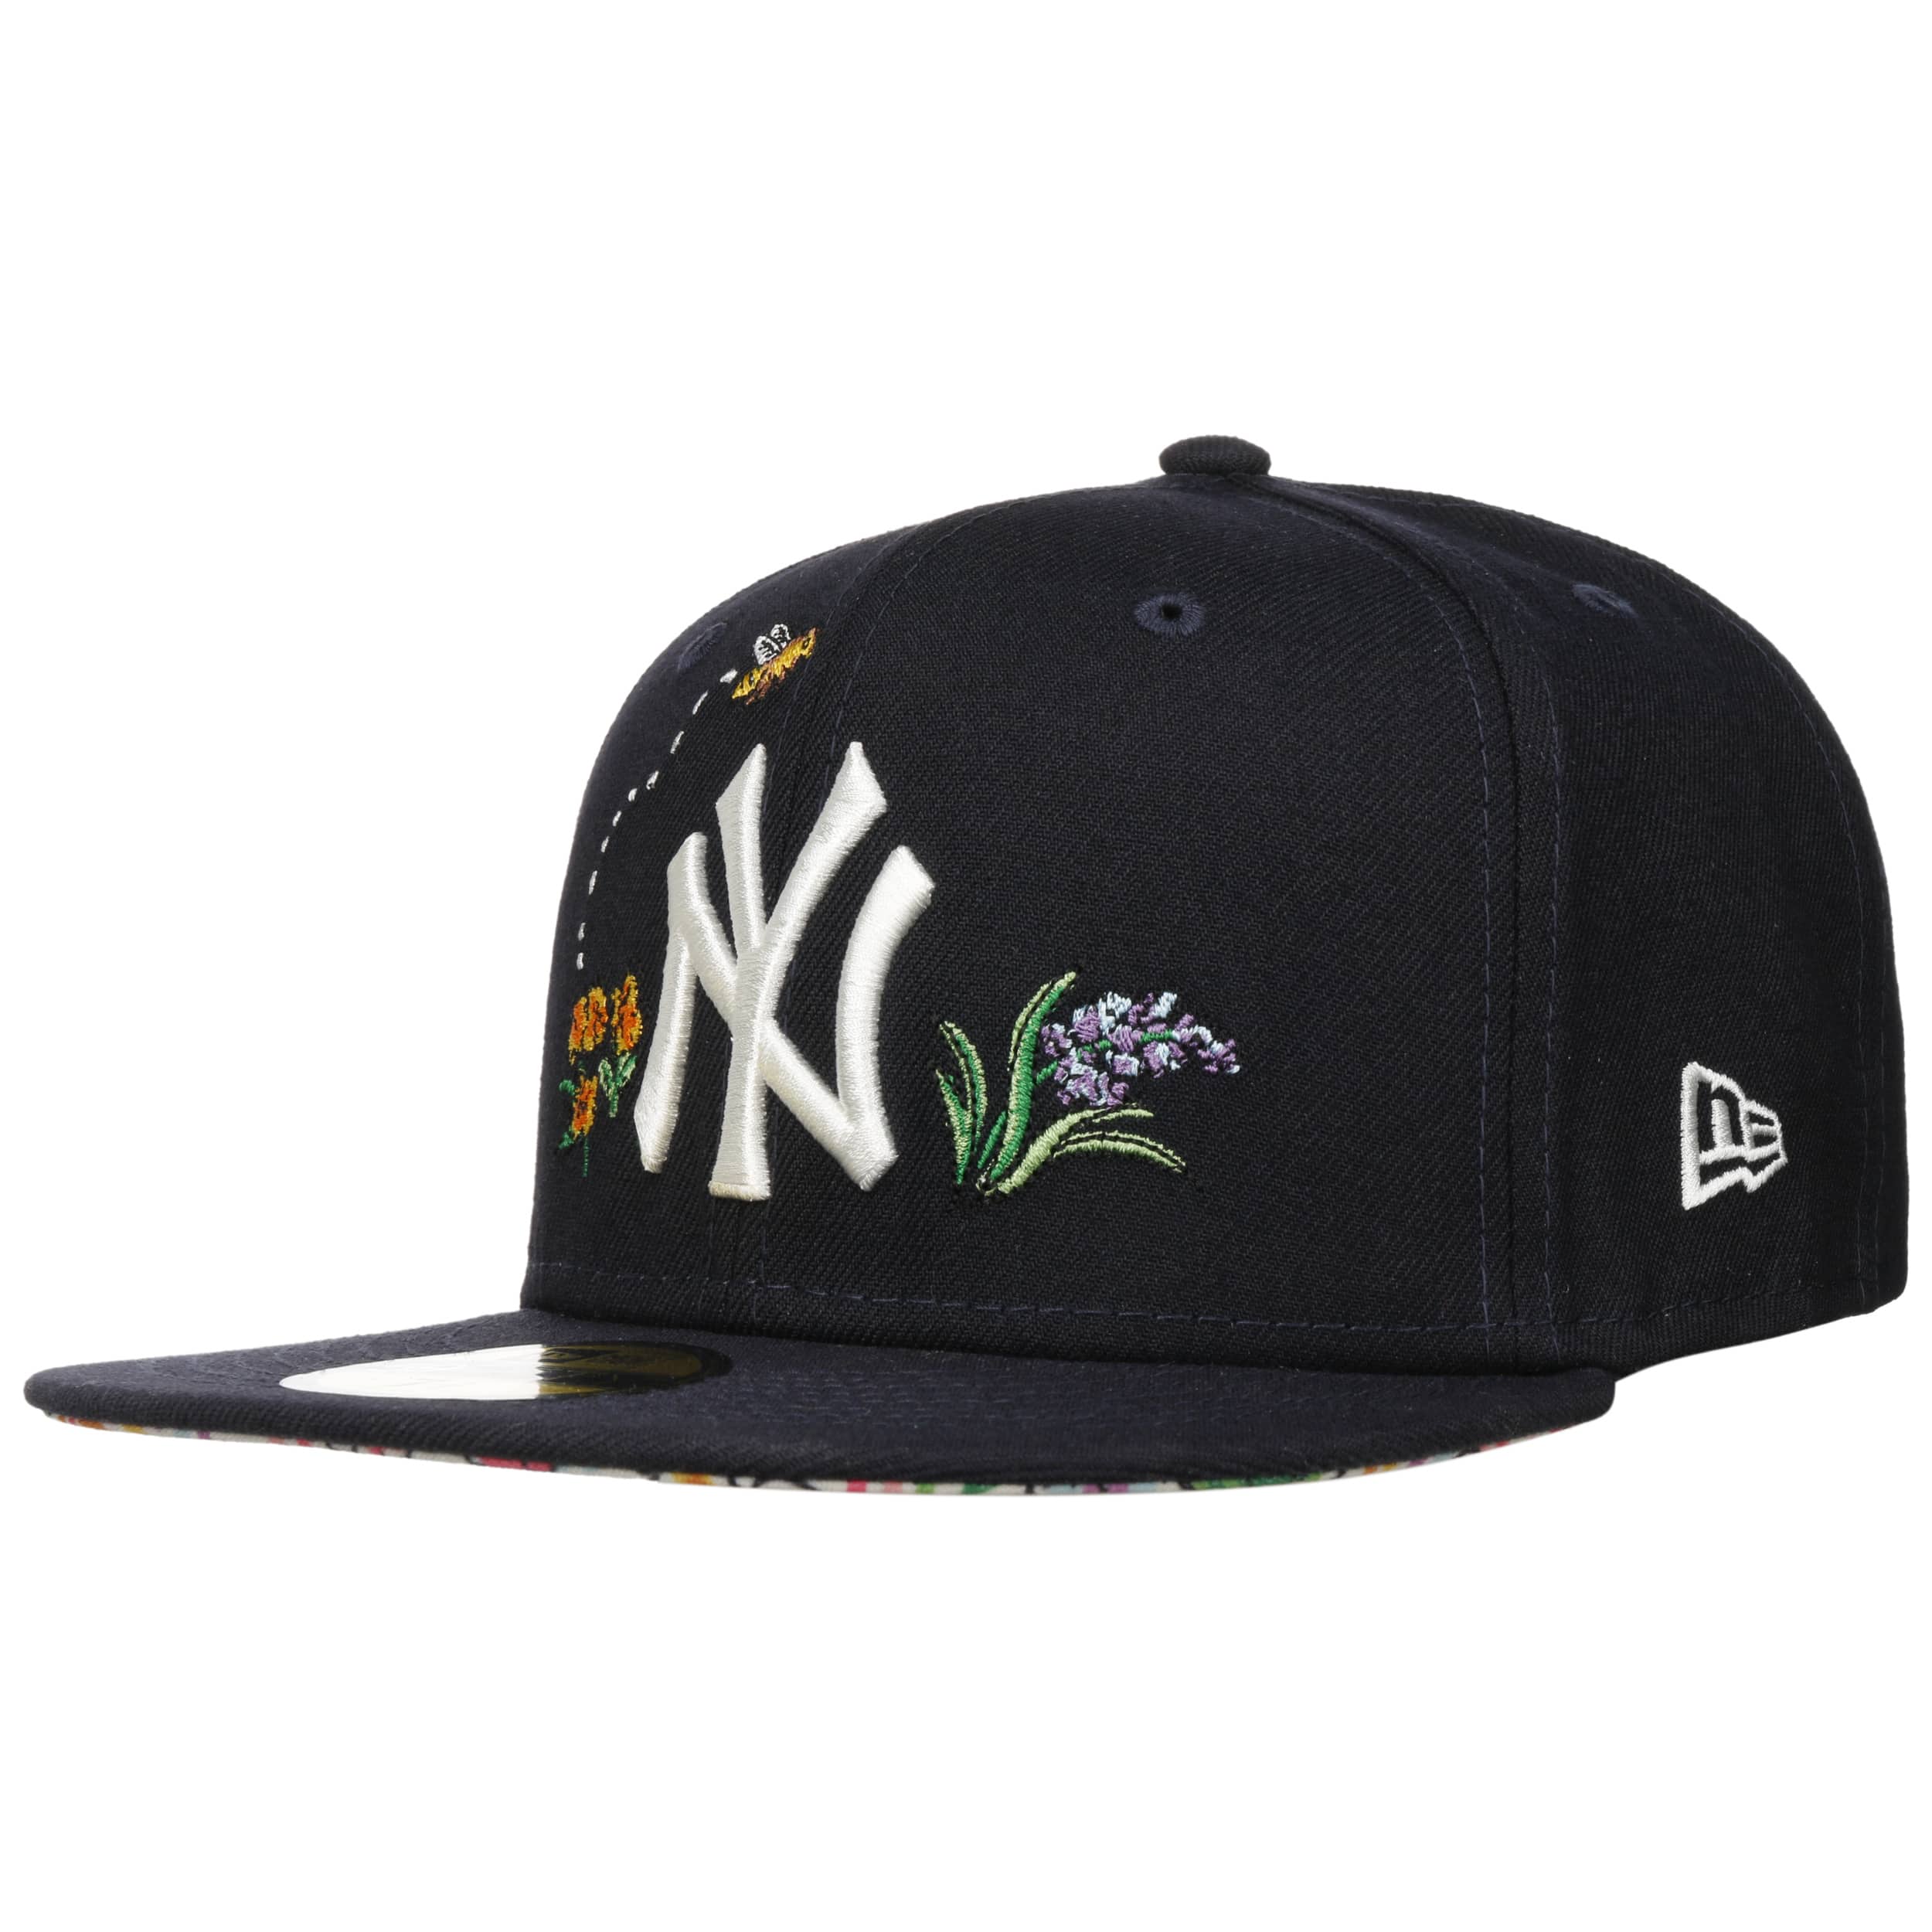 New Era New York Yankees MLB Black Fitted Hat Cap Adult Size 7 5/8